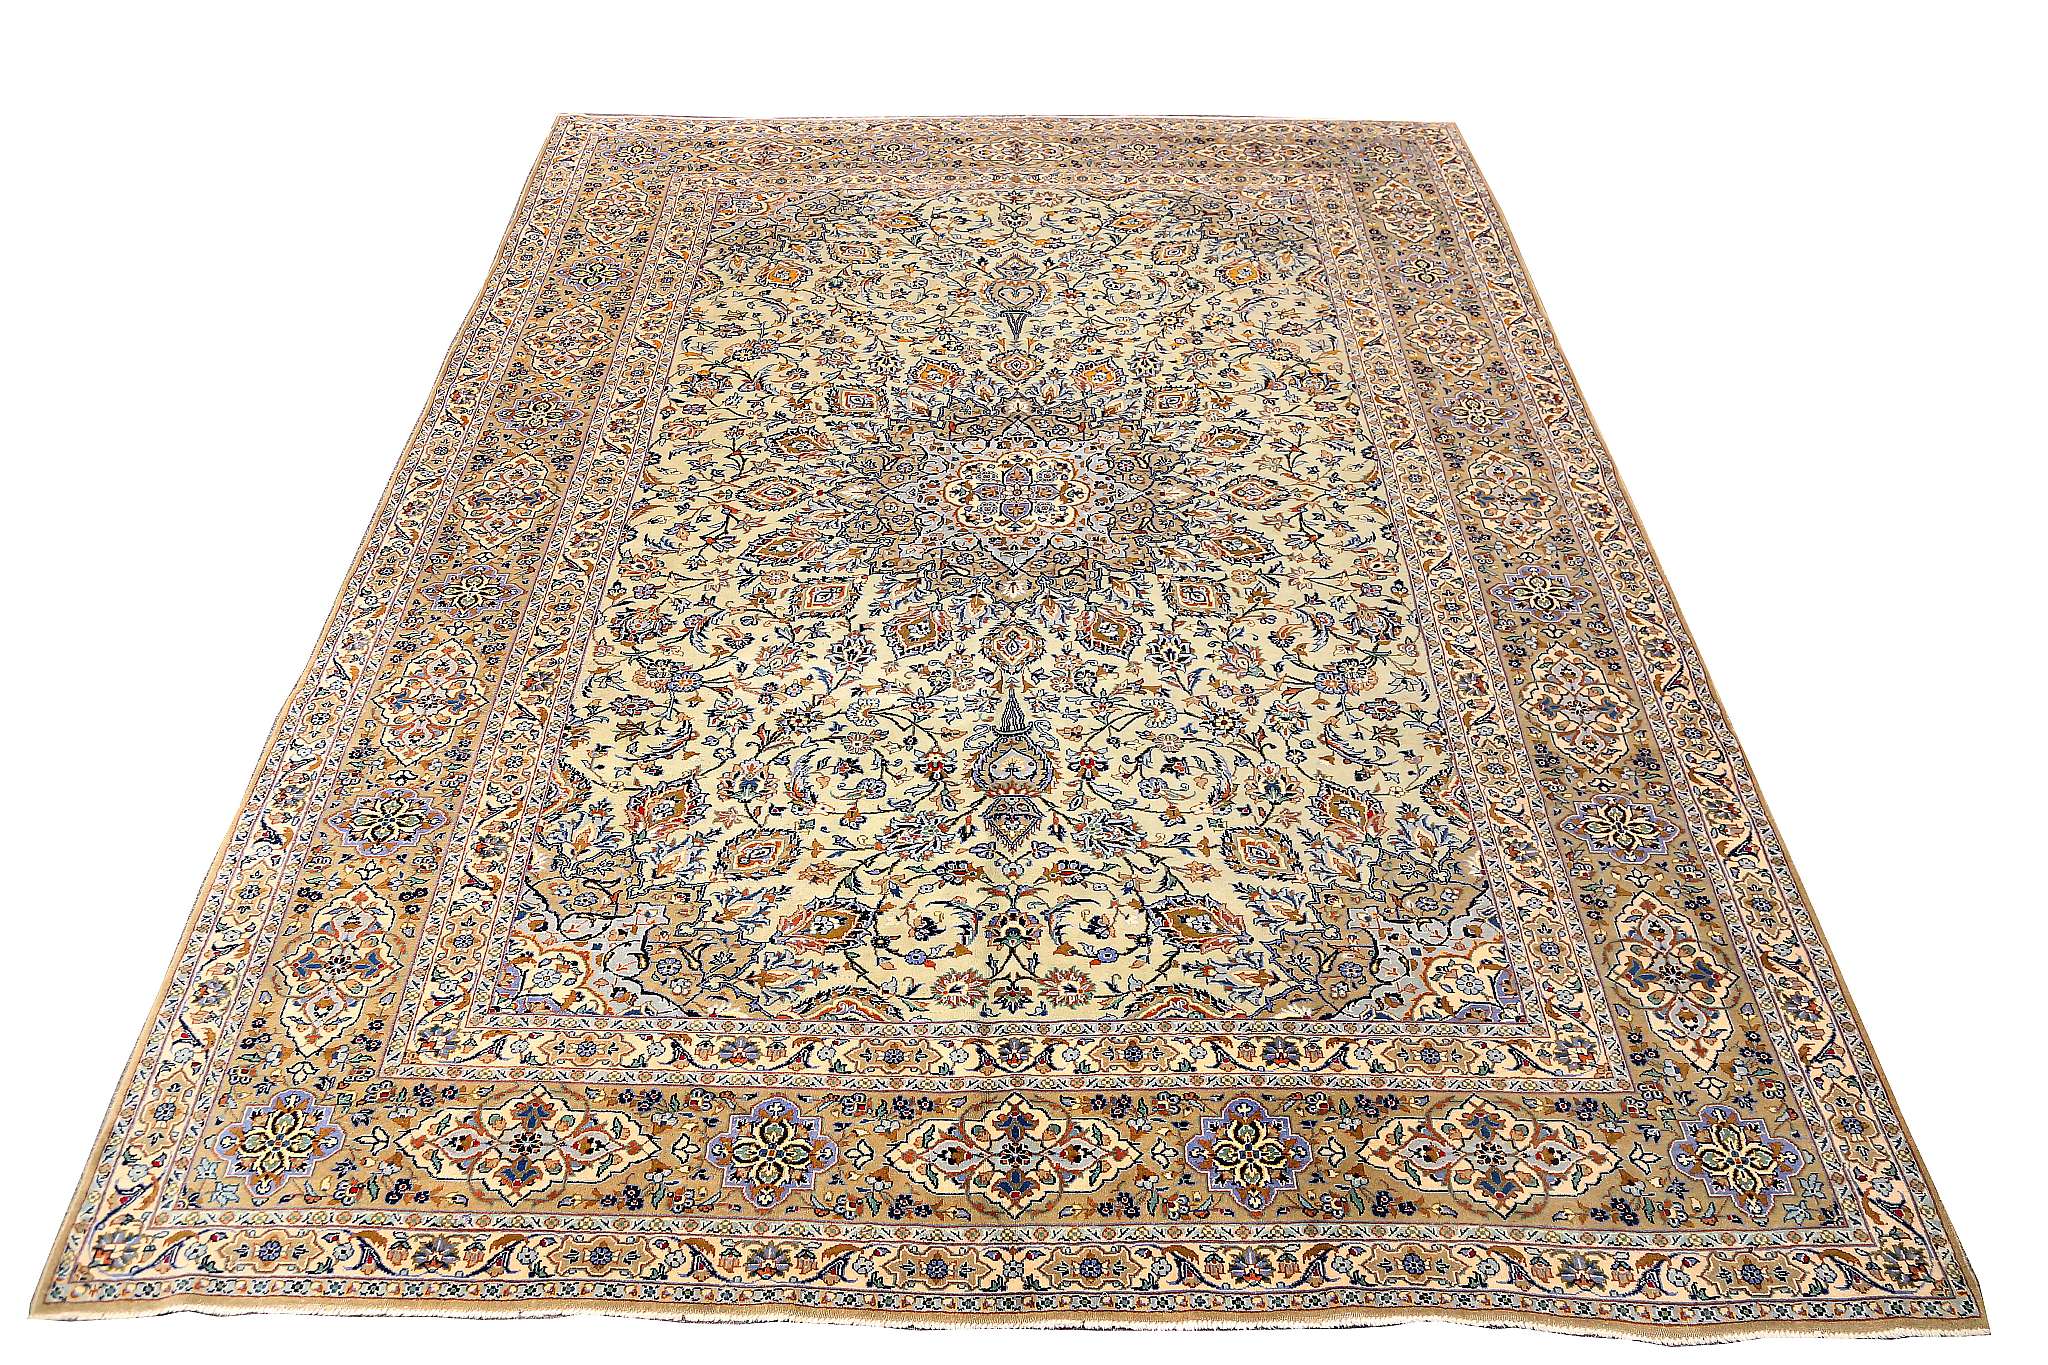 A FINE SIGNED KASHAN CARPET CENTRAL PERSIA, CIRCA 1950 approx: 12ft.2in. x 9ft.2in.(370cm. x 279cm.)